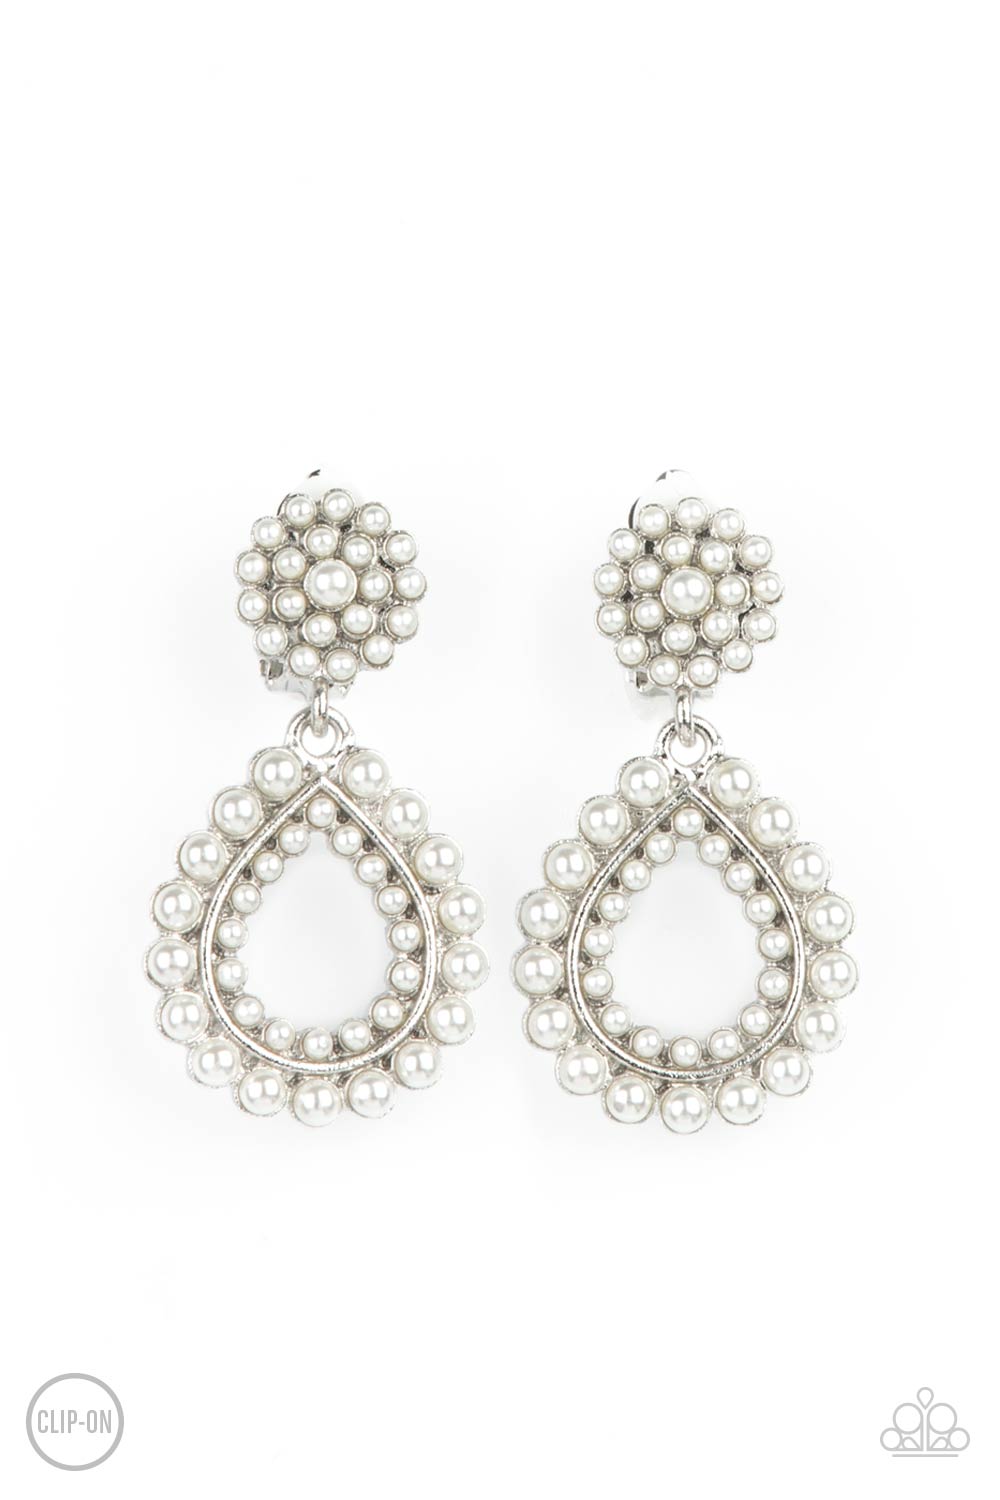 Discerning Droplets - White Earring - Paparazzi - Dare2bdazzlin N Jewelry